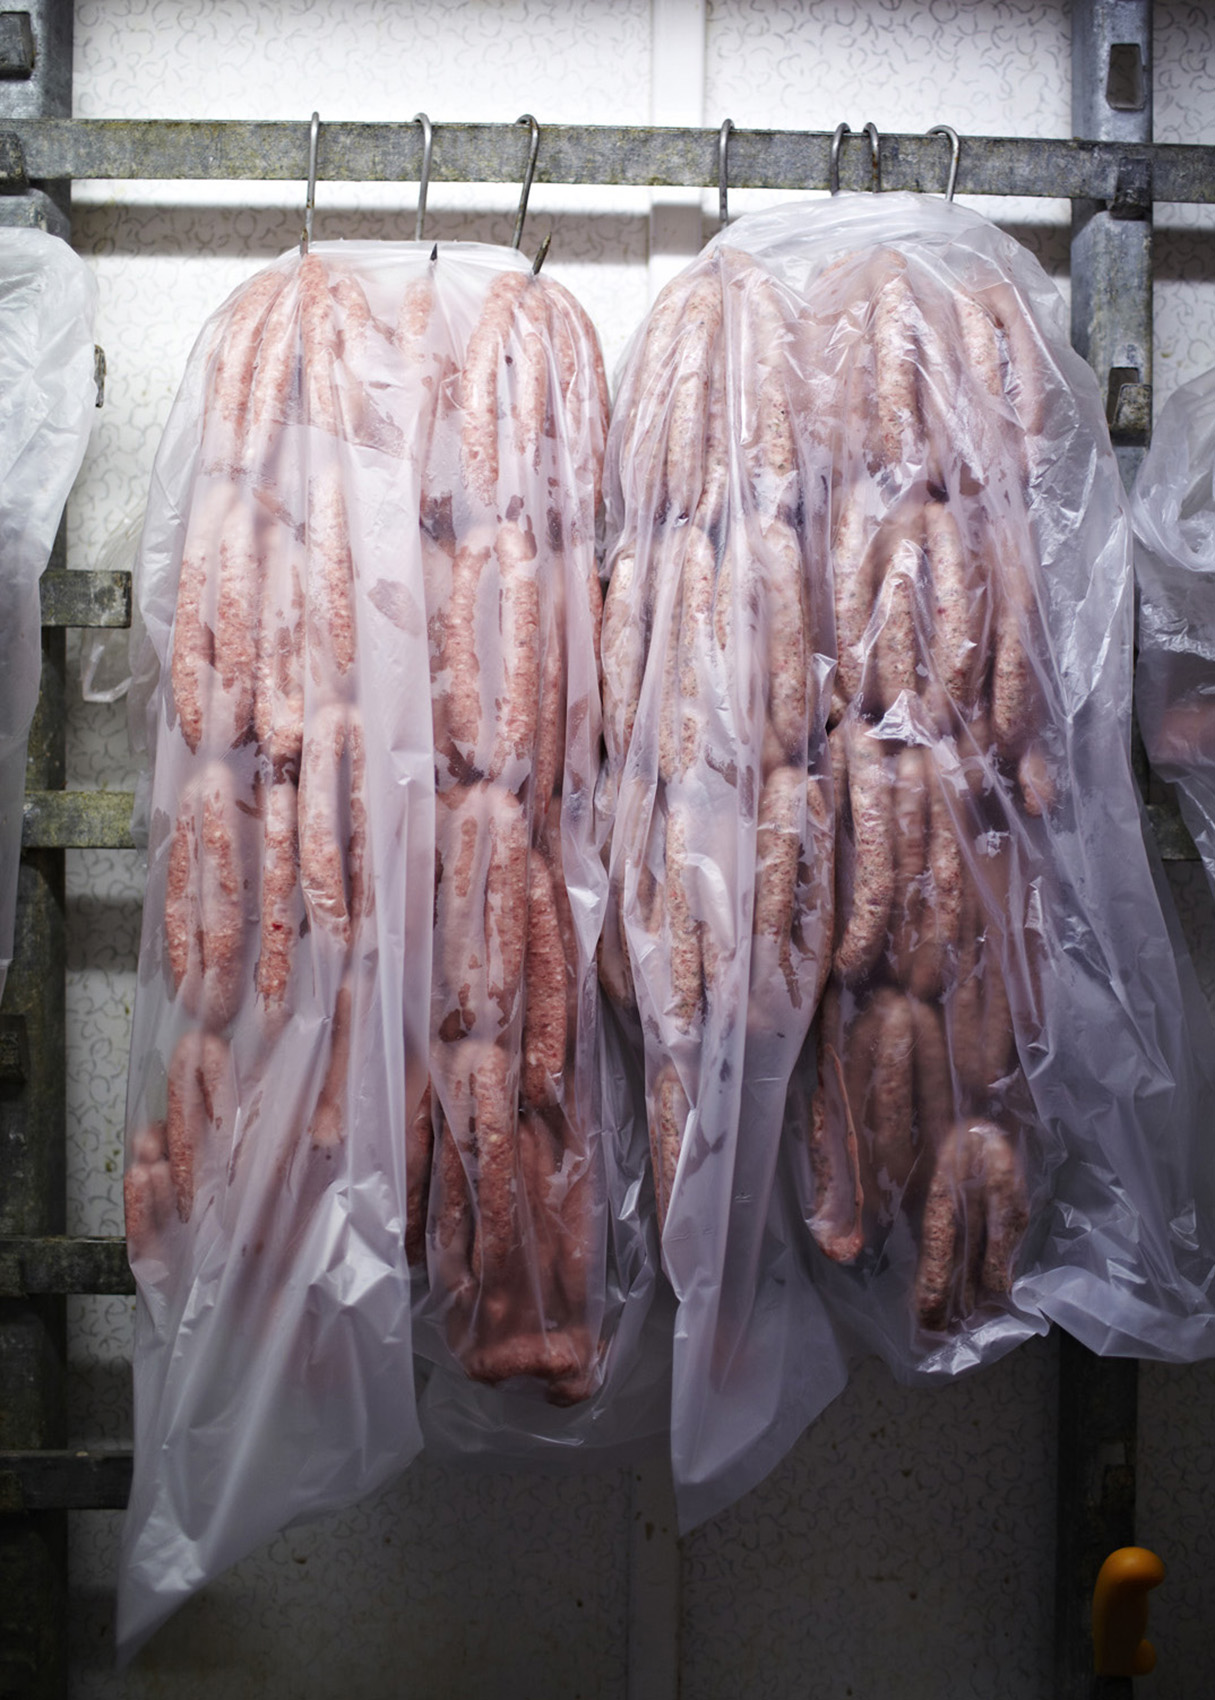 SteveRyan_Photographer_Ingredients_Produce_Meat_Butcher_Sausages_07